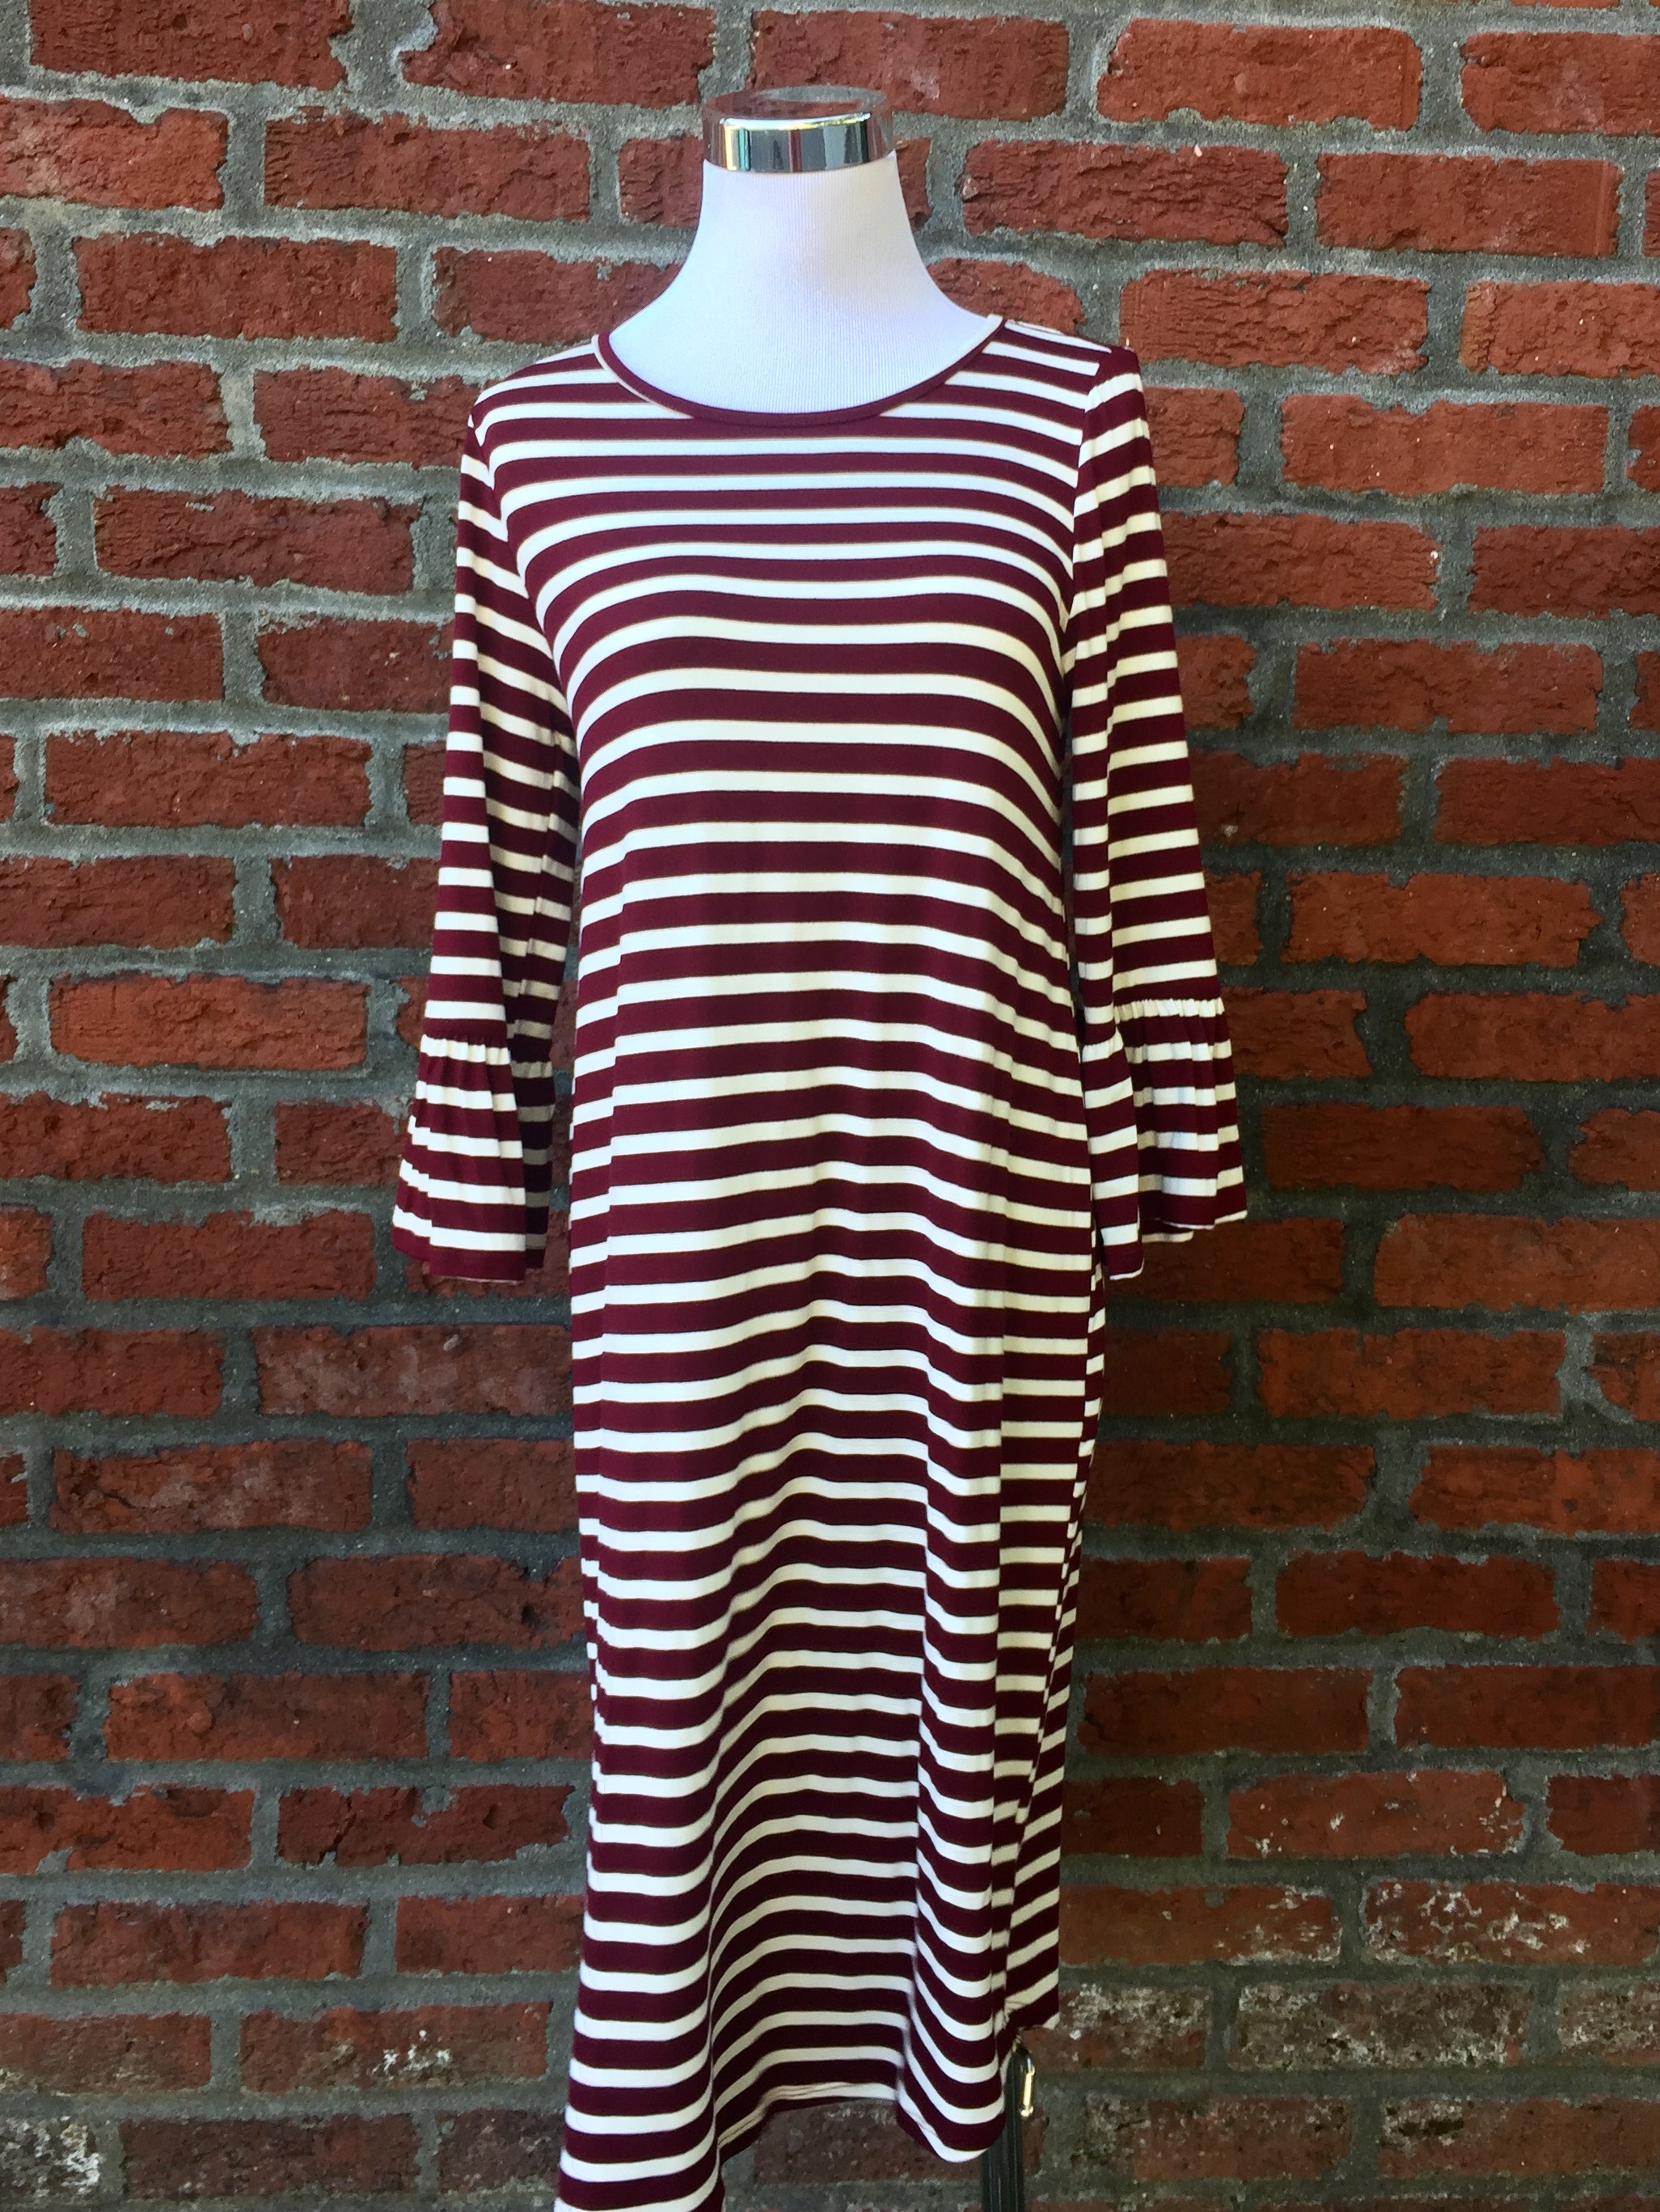 Striped Bell Sleeve Dress (Wine and Charcoal, $38)